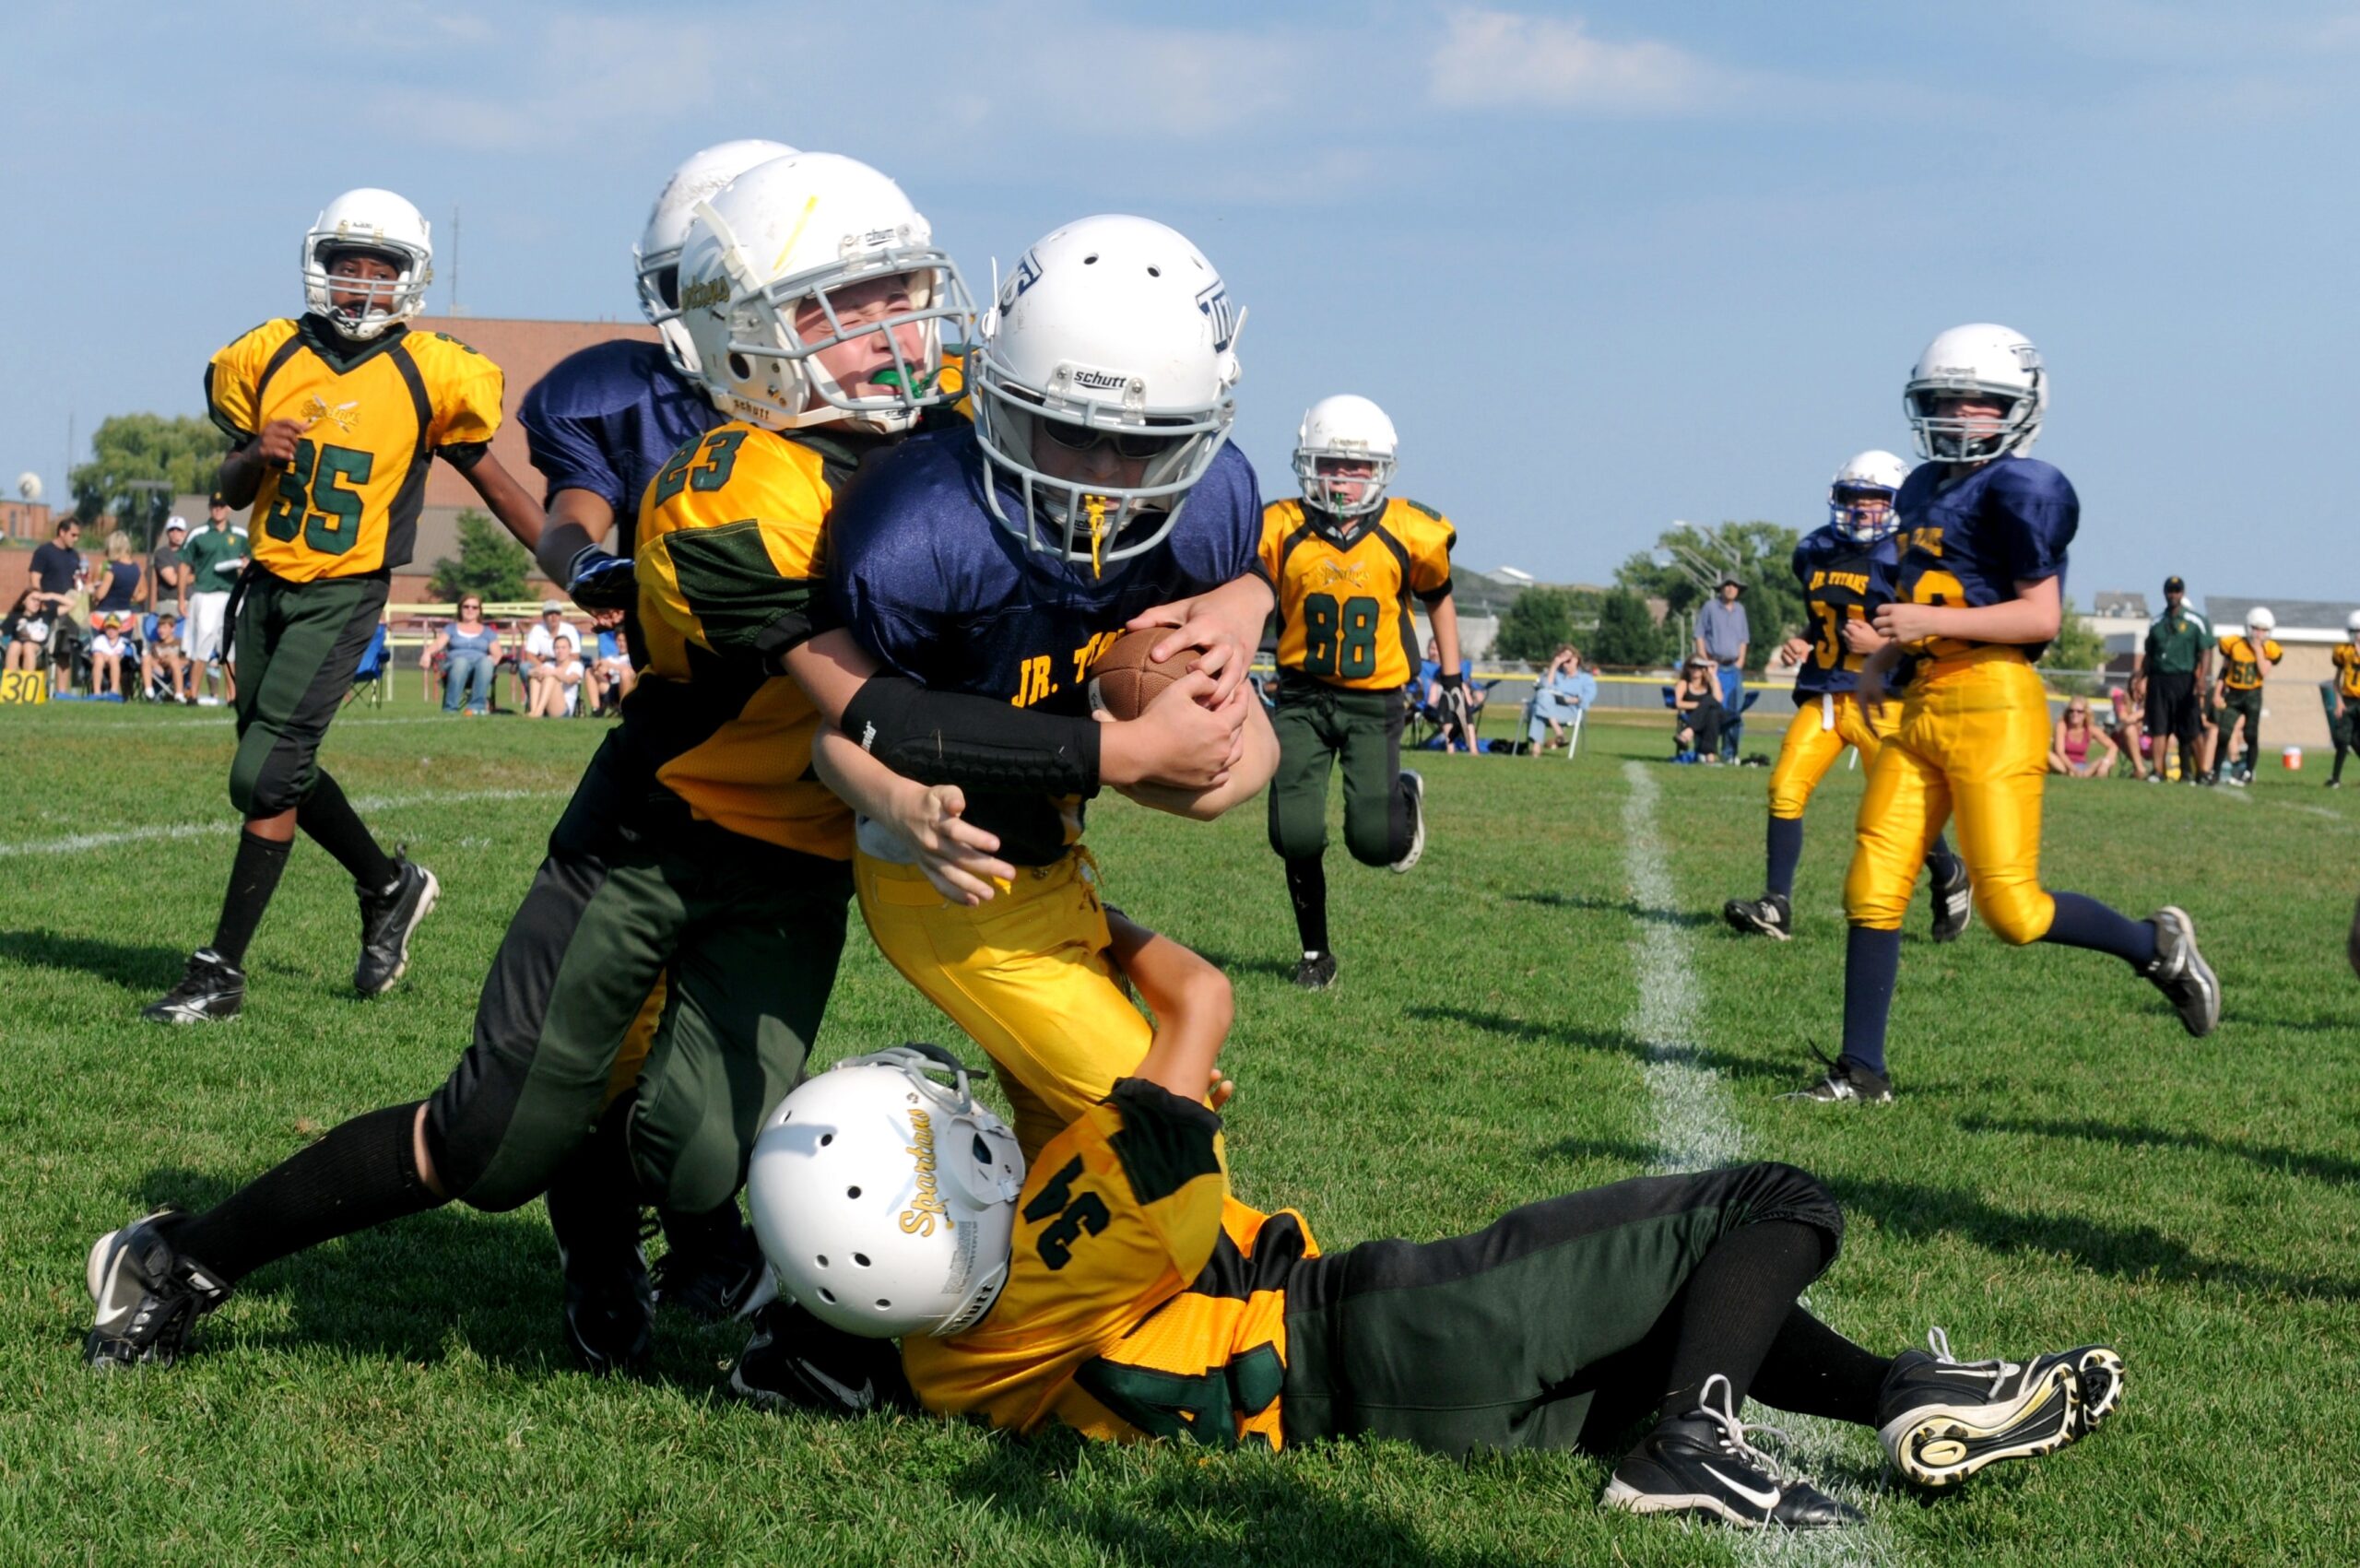 football-Concussions-treatment-Physical-Therapy-Southern-Rehab-and-Sports-Medicine